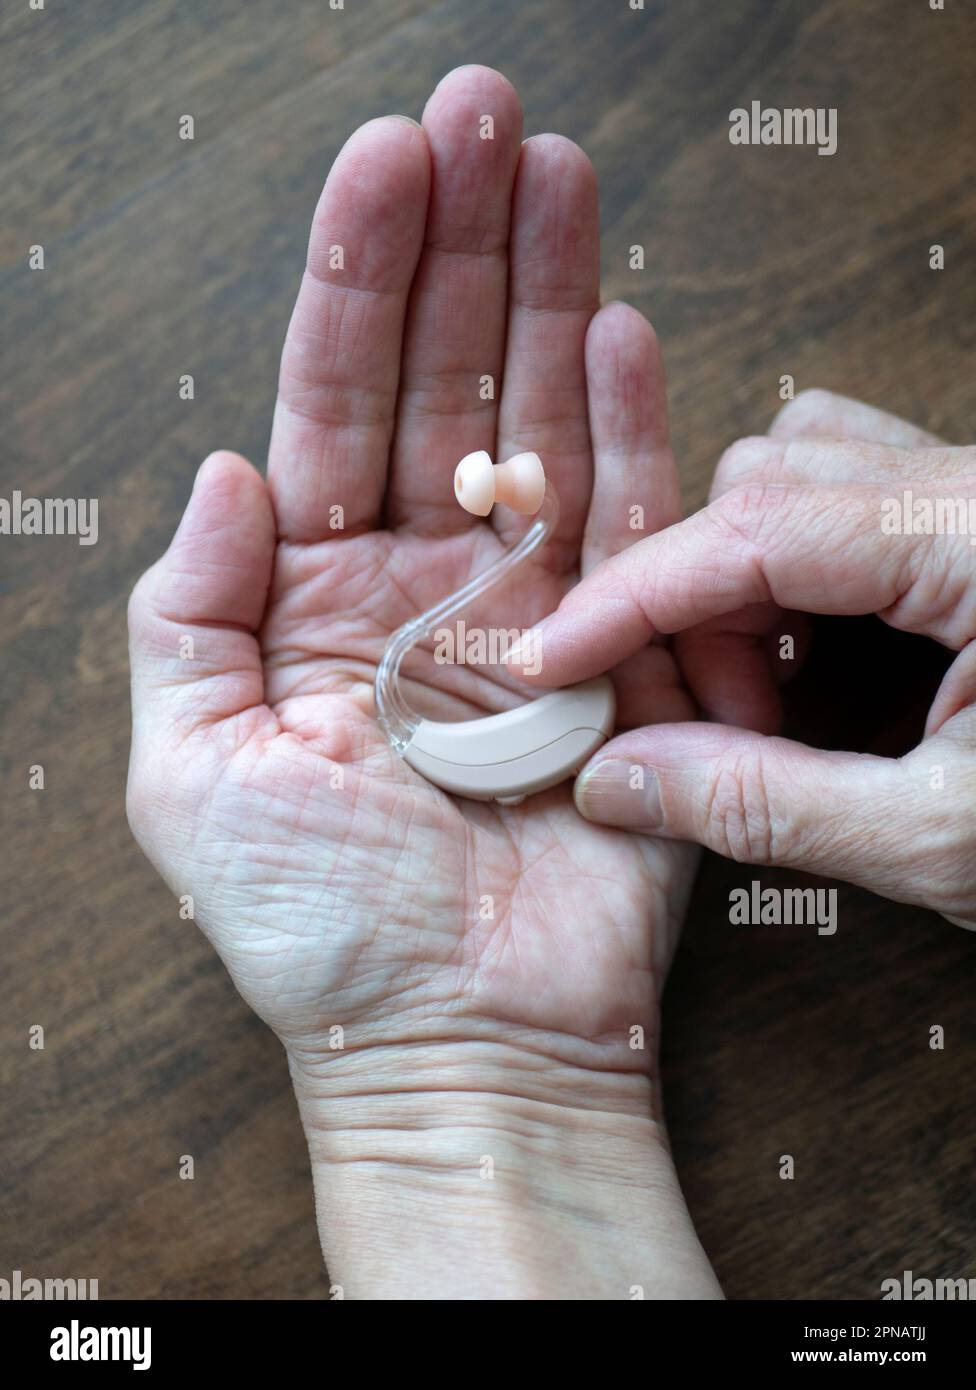 Hearing aid in hand, vertical format. Assistive listening or alerting devices. World hearing day Stock Photo